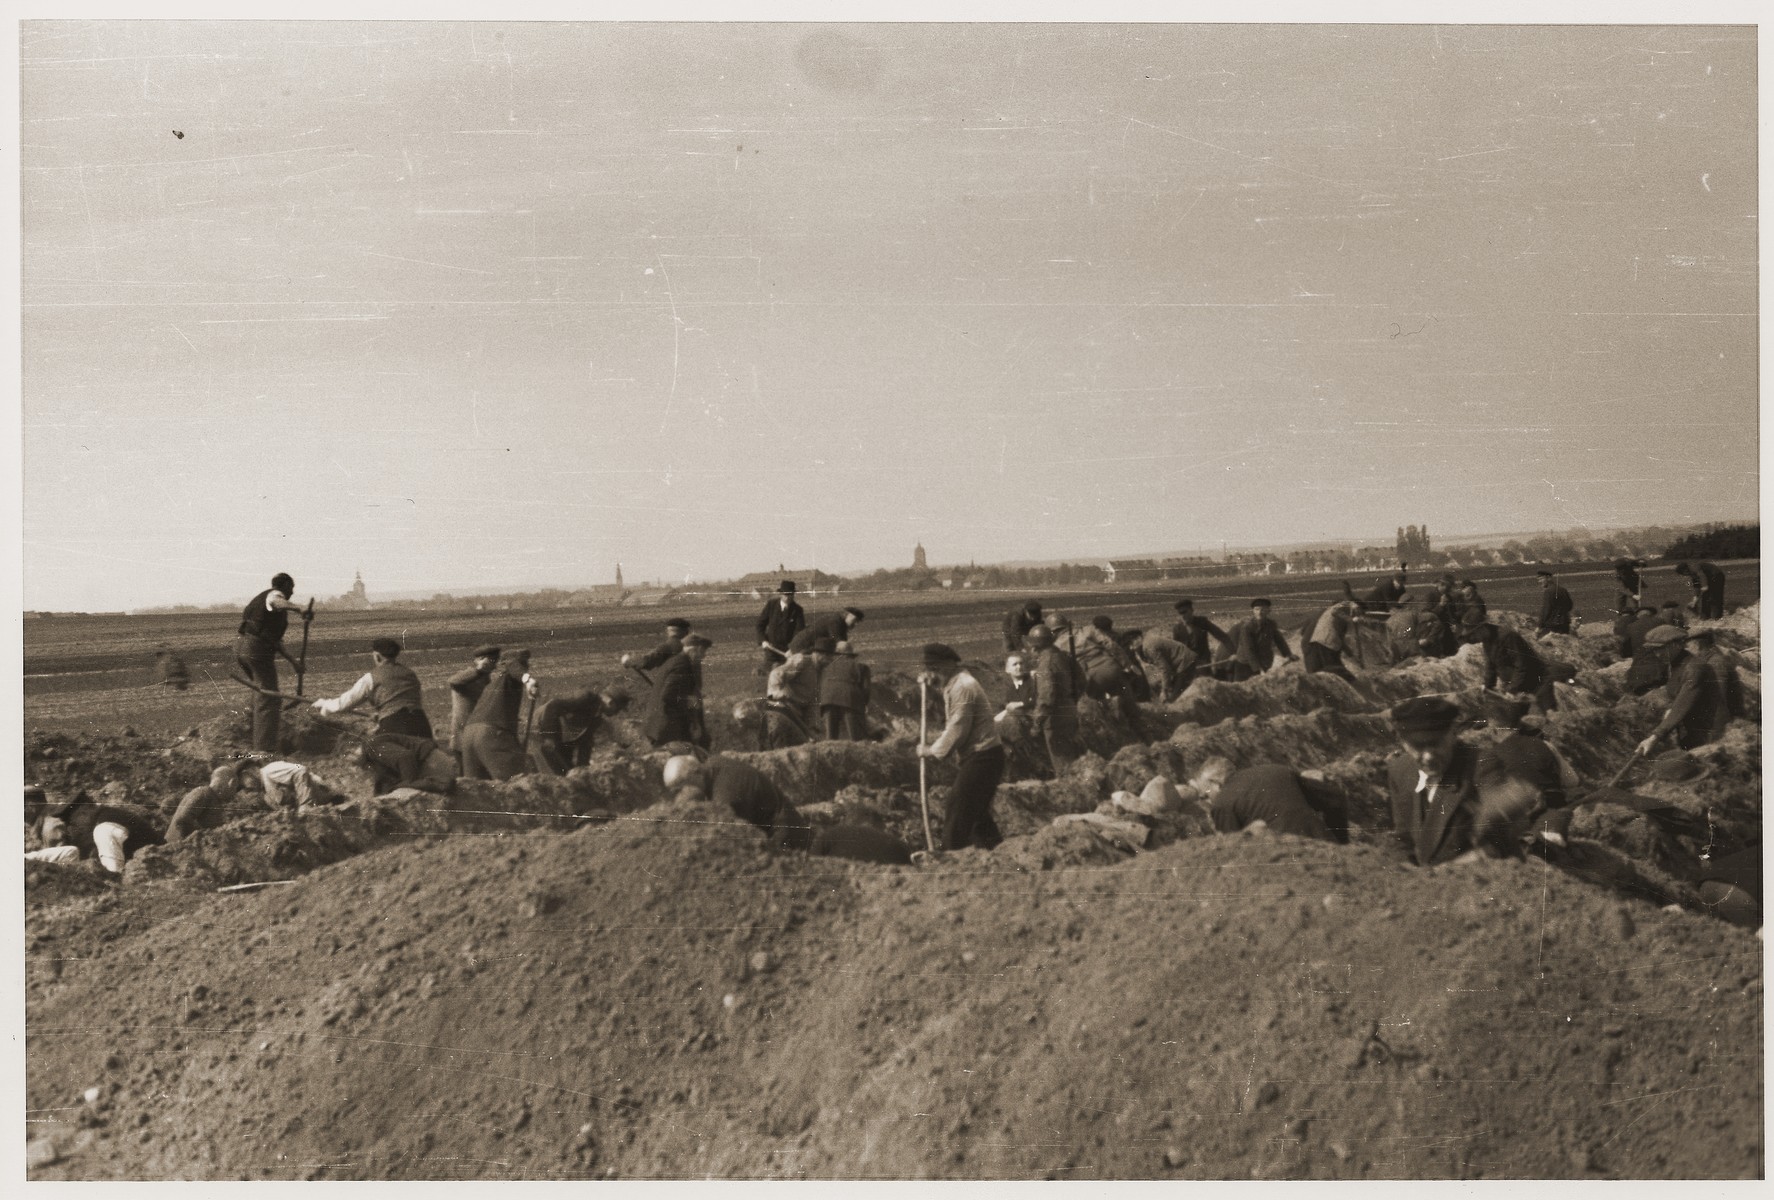 German civilians dig graves for the bodies of concentration camp prisoners killed by the SS in a barn just outside of Gardelegen, which can be seen in the background.